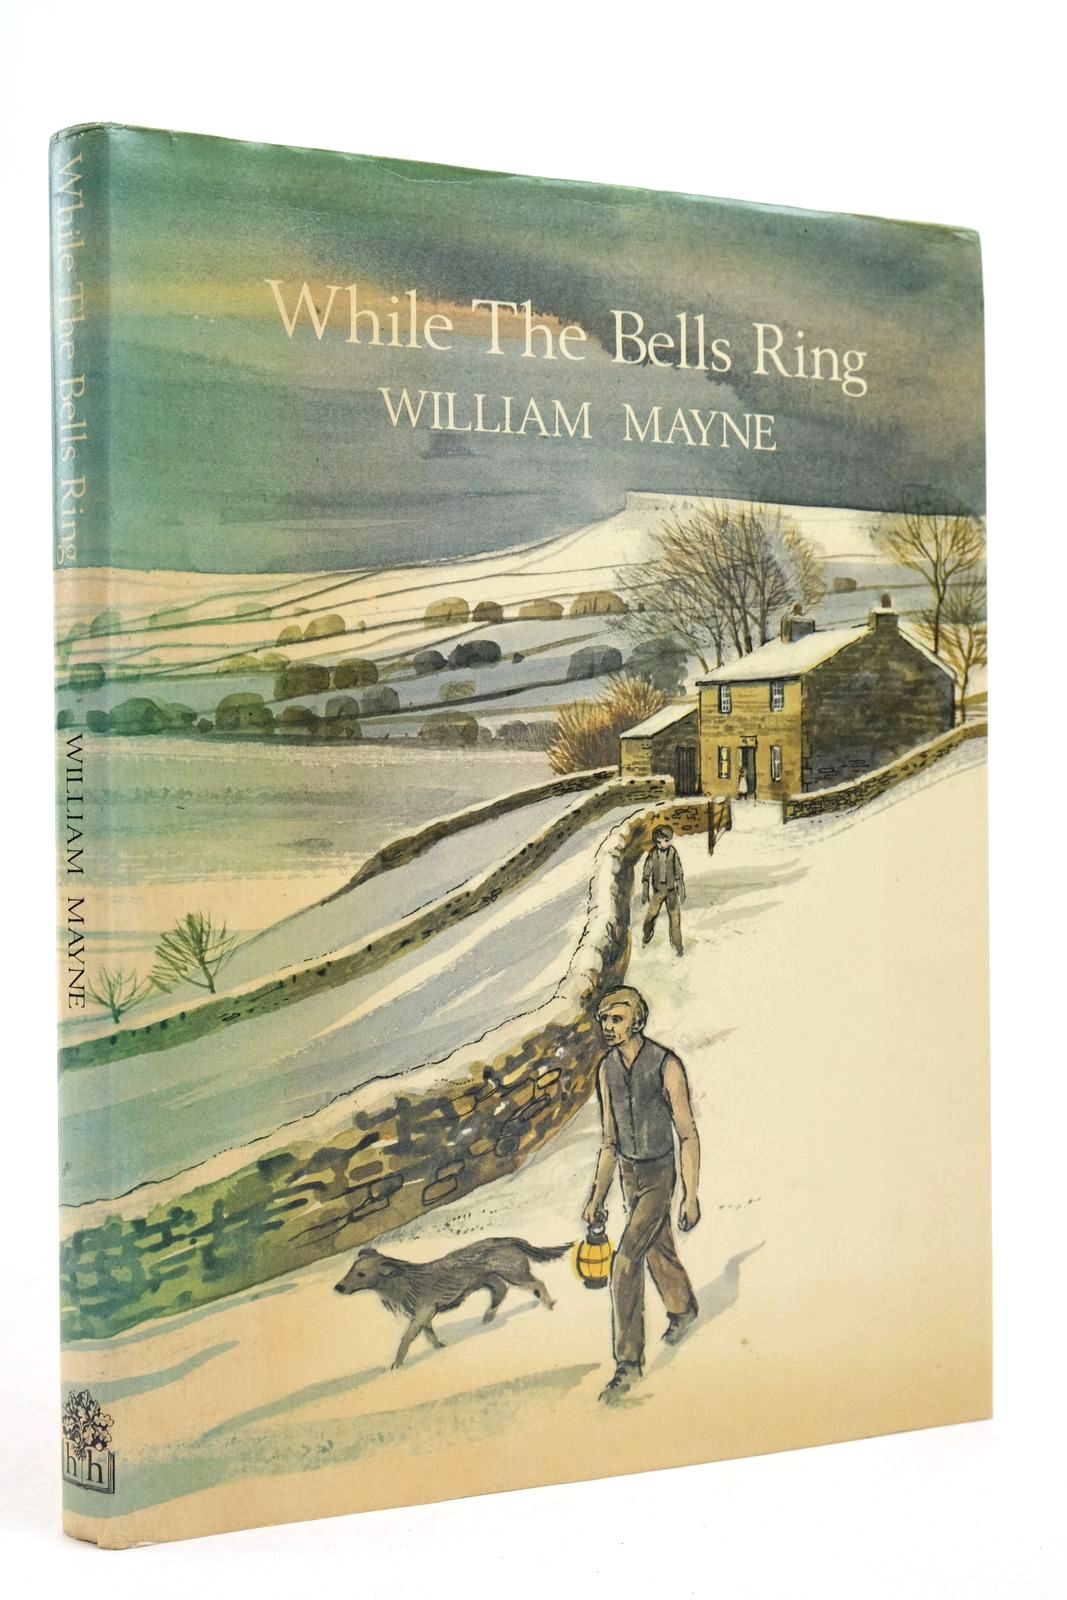 Photo of WHILE THE BELLS RING written by Mayne, William illustrated by Rawlins, Janet published by Hamish Hamilton (STOCK CODE: 2140271)  for sale by Stella & Rose's Books